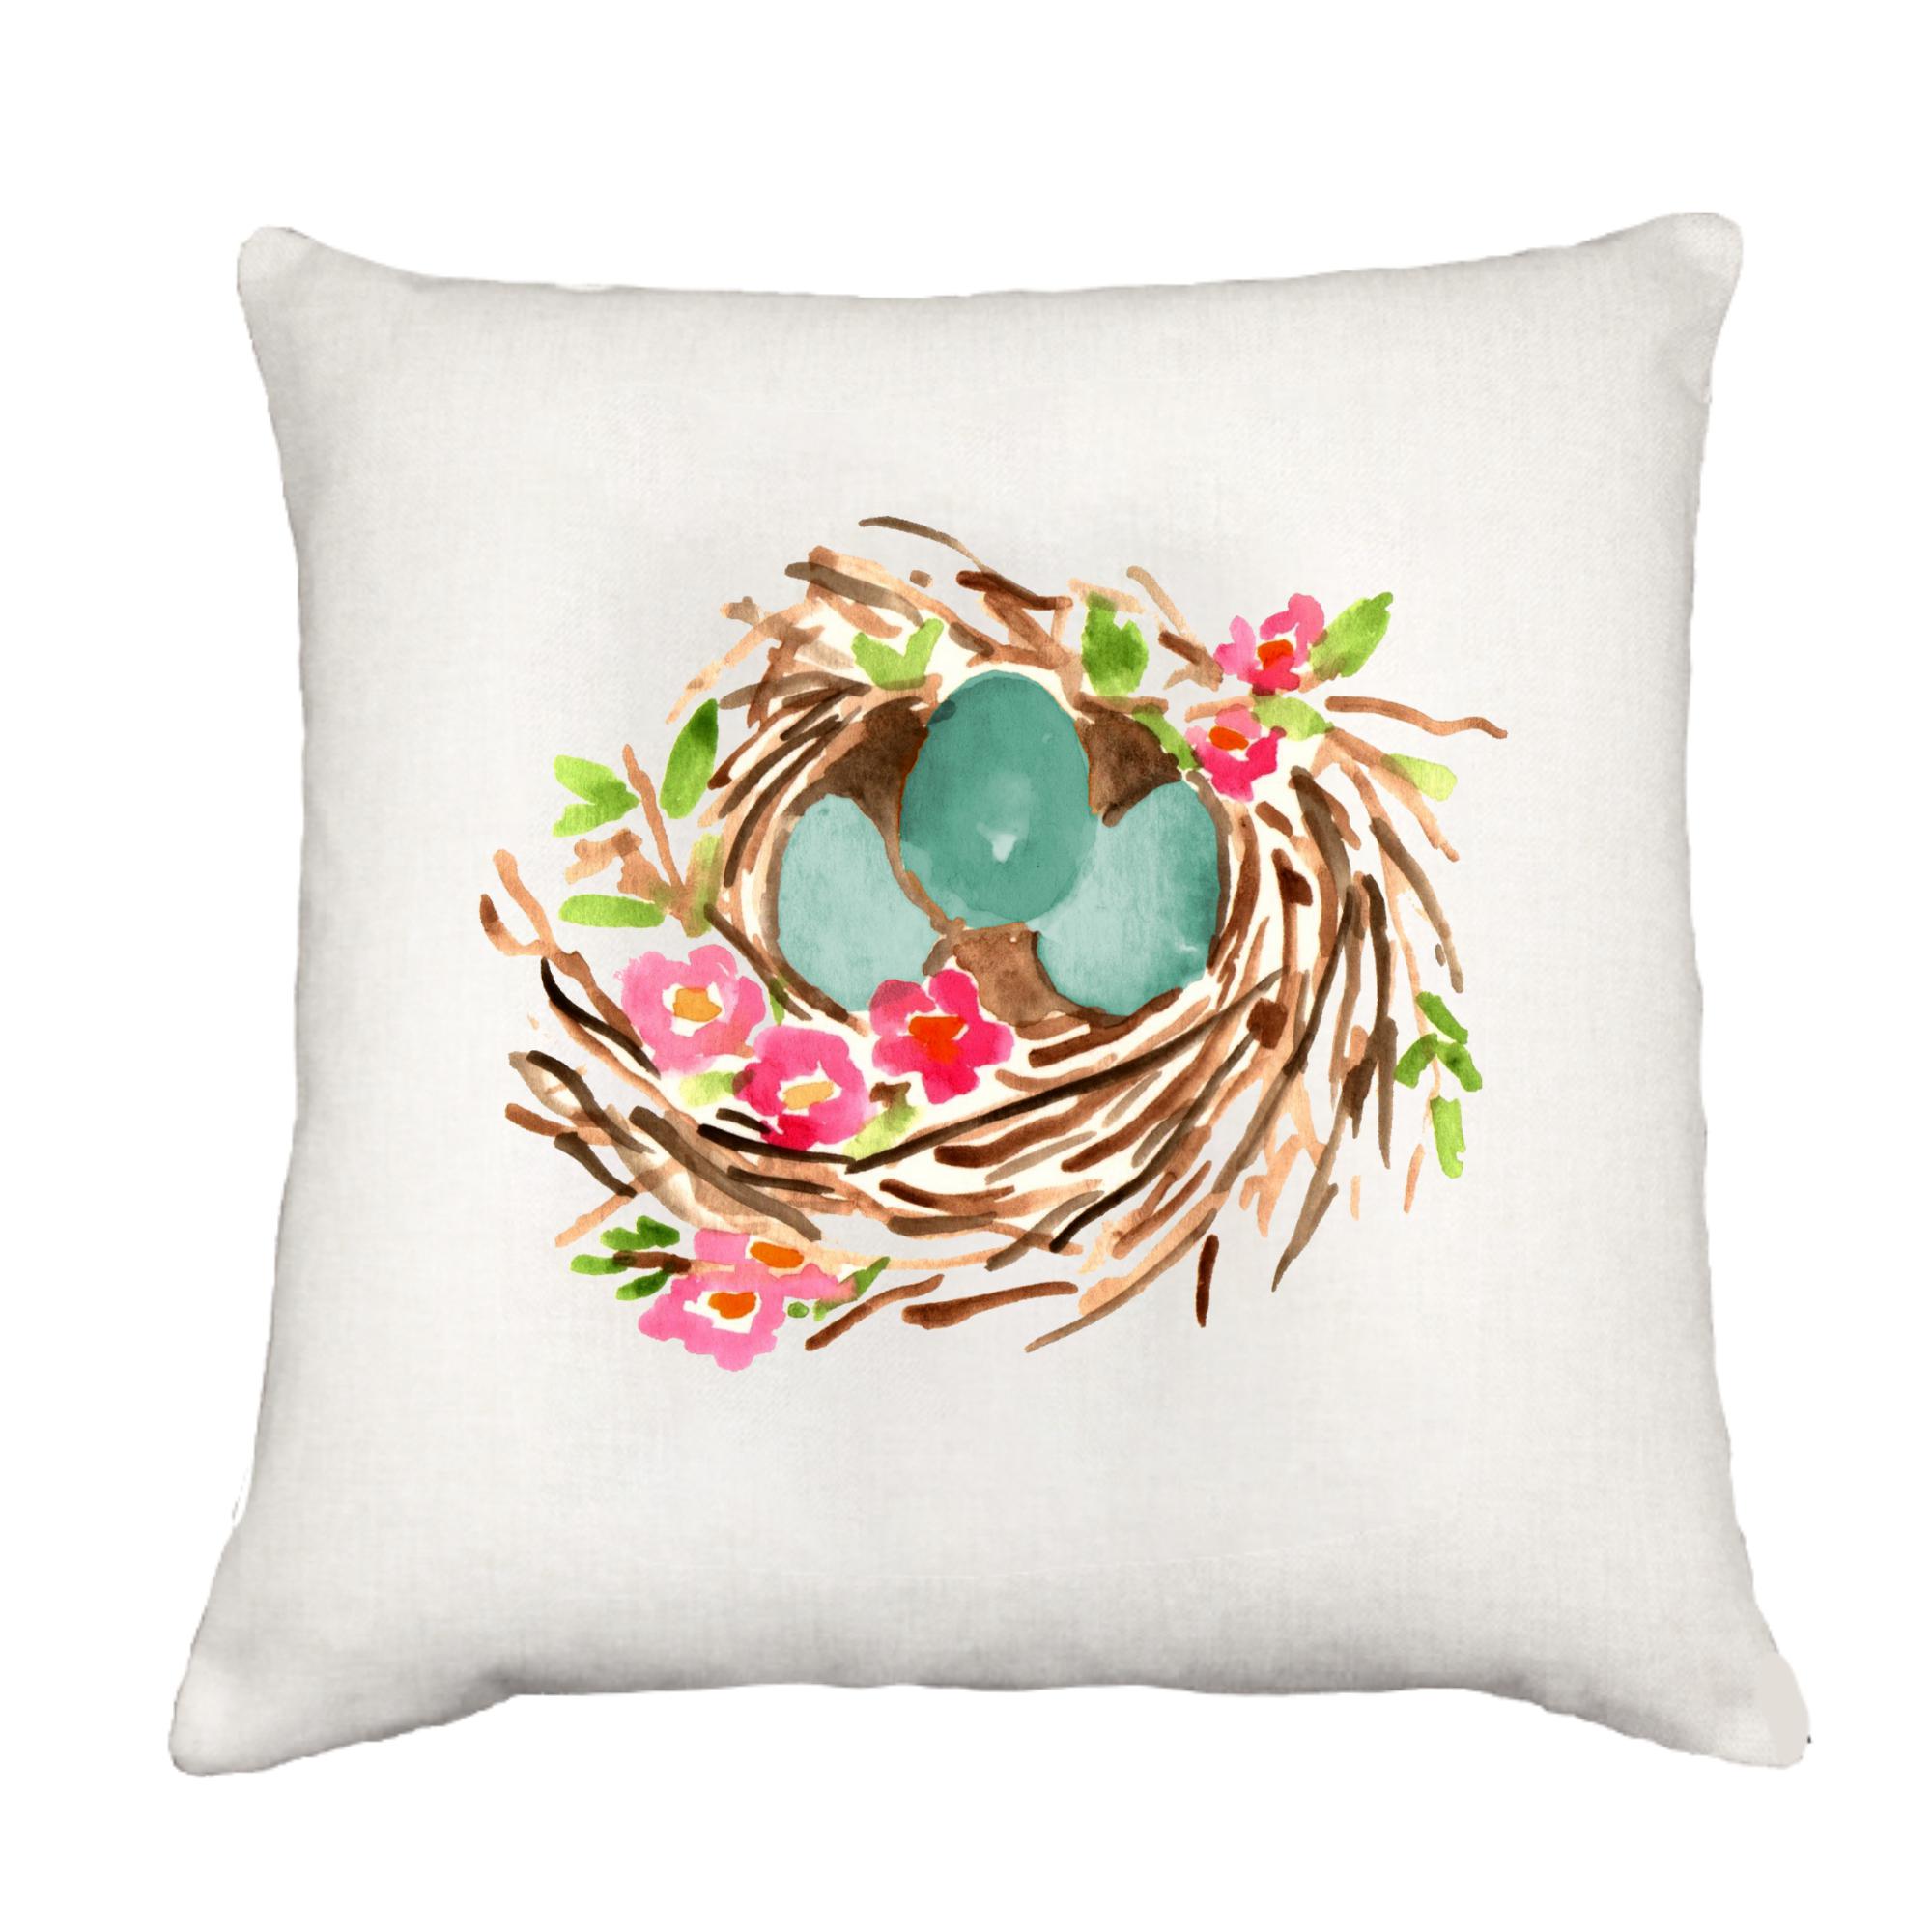 Nest with Blue Eggs Cottage Pillow Throw/Decorative Pillow - Southern Sisters